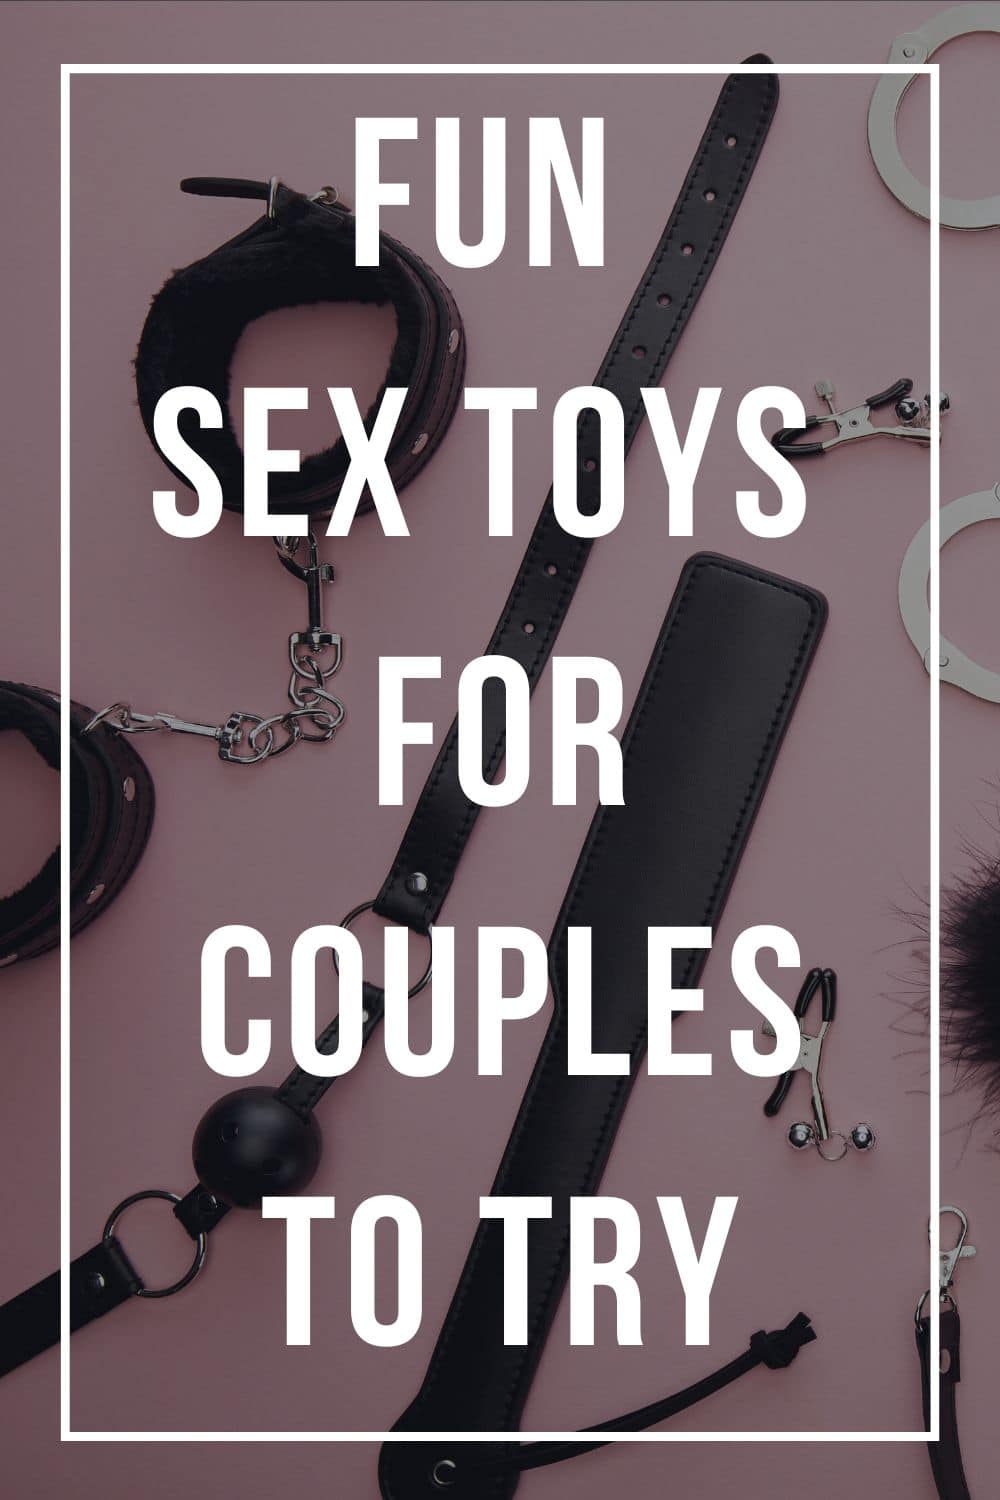 Fun Sex Toys for Couples: 10 Ideas for Your Bedroom Collection